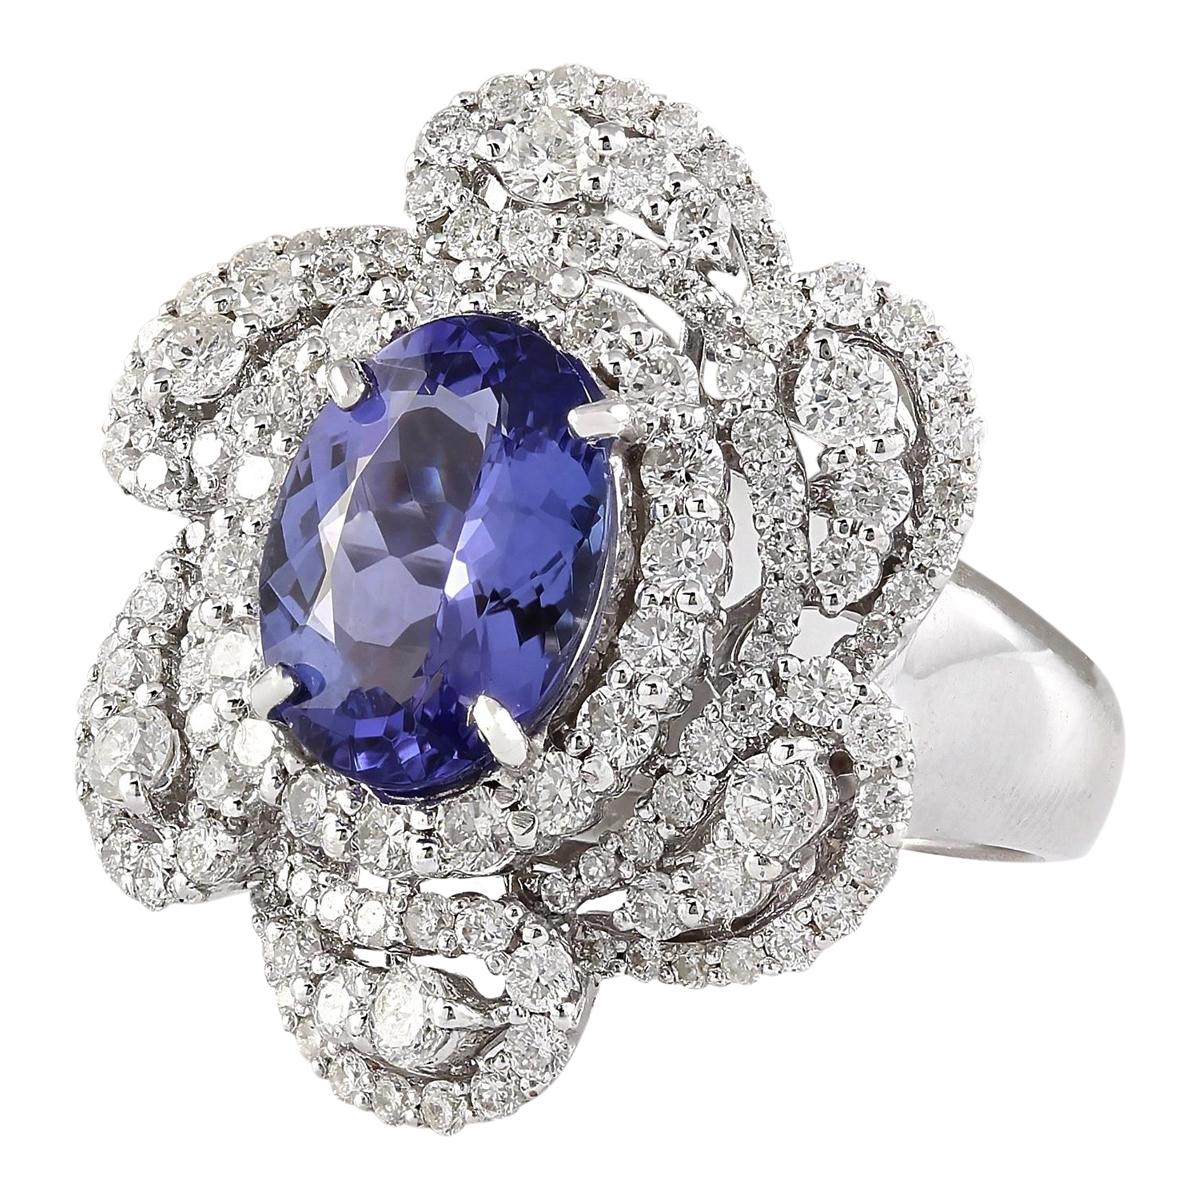 Indulge in luxury with our exquisite 14K White Gold Diamond Ring featuring a stunning 5.11 Carat Tanzanite centerpiece. Crafted with precision and elegance, this ring boasts a total metal weight of 10.5 grams, ensuring durability and sophistication.